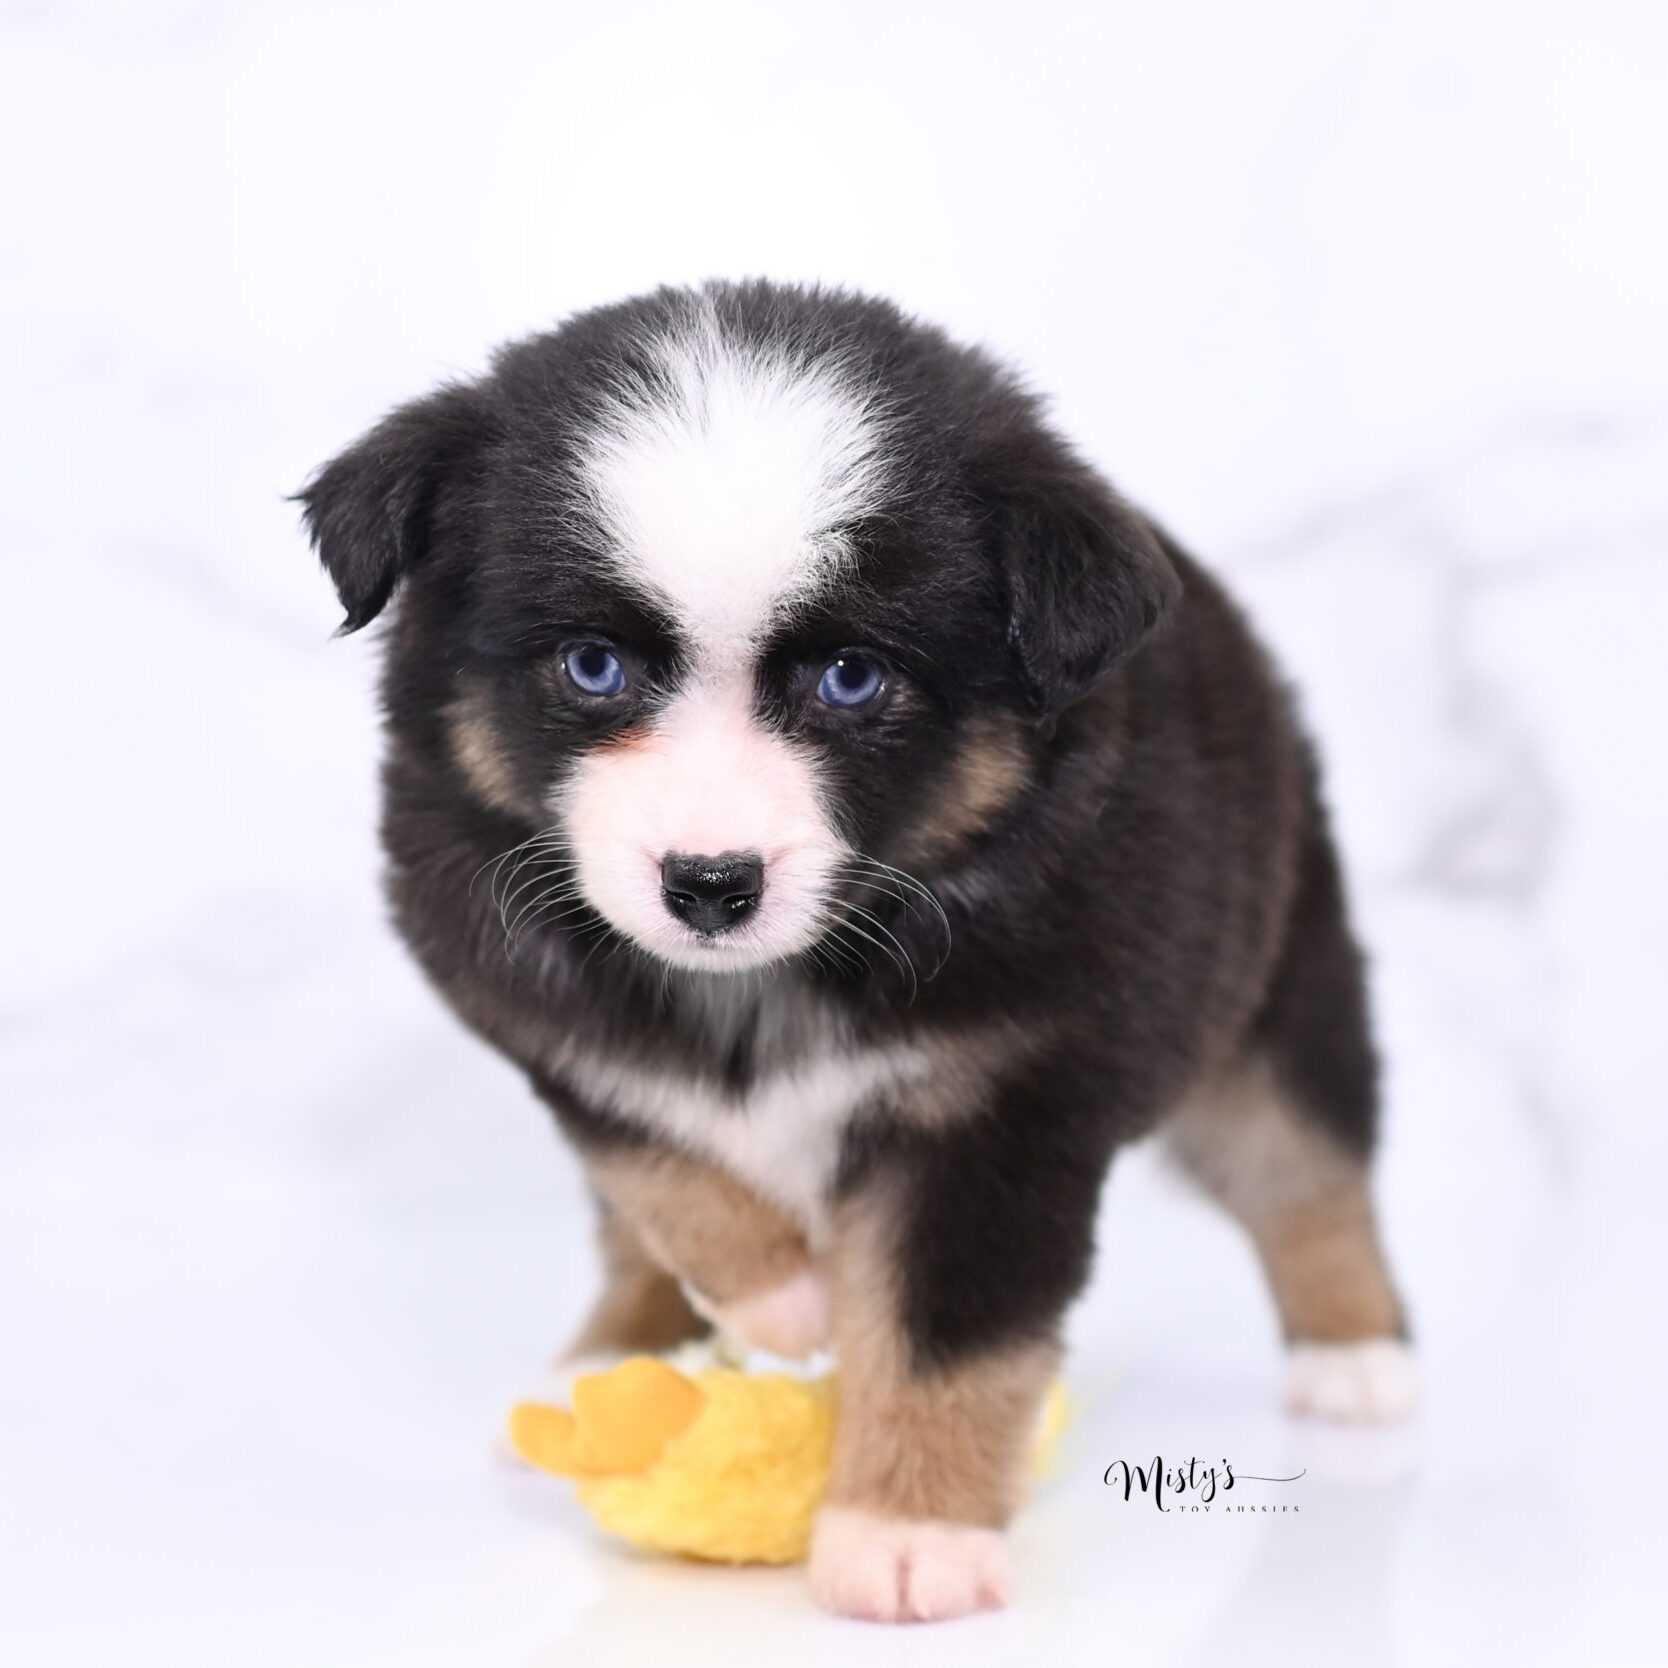 Mistys Toy Aussies Puppies Cubby 7 Weeks768